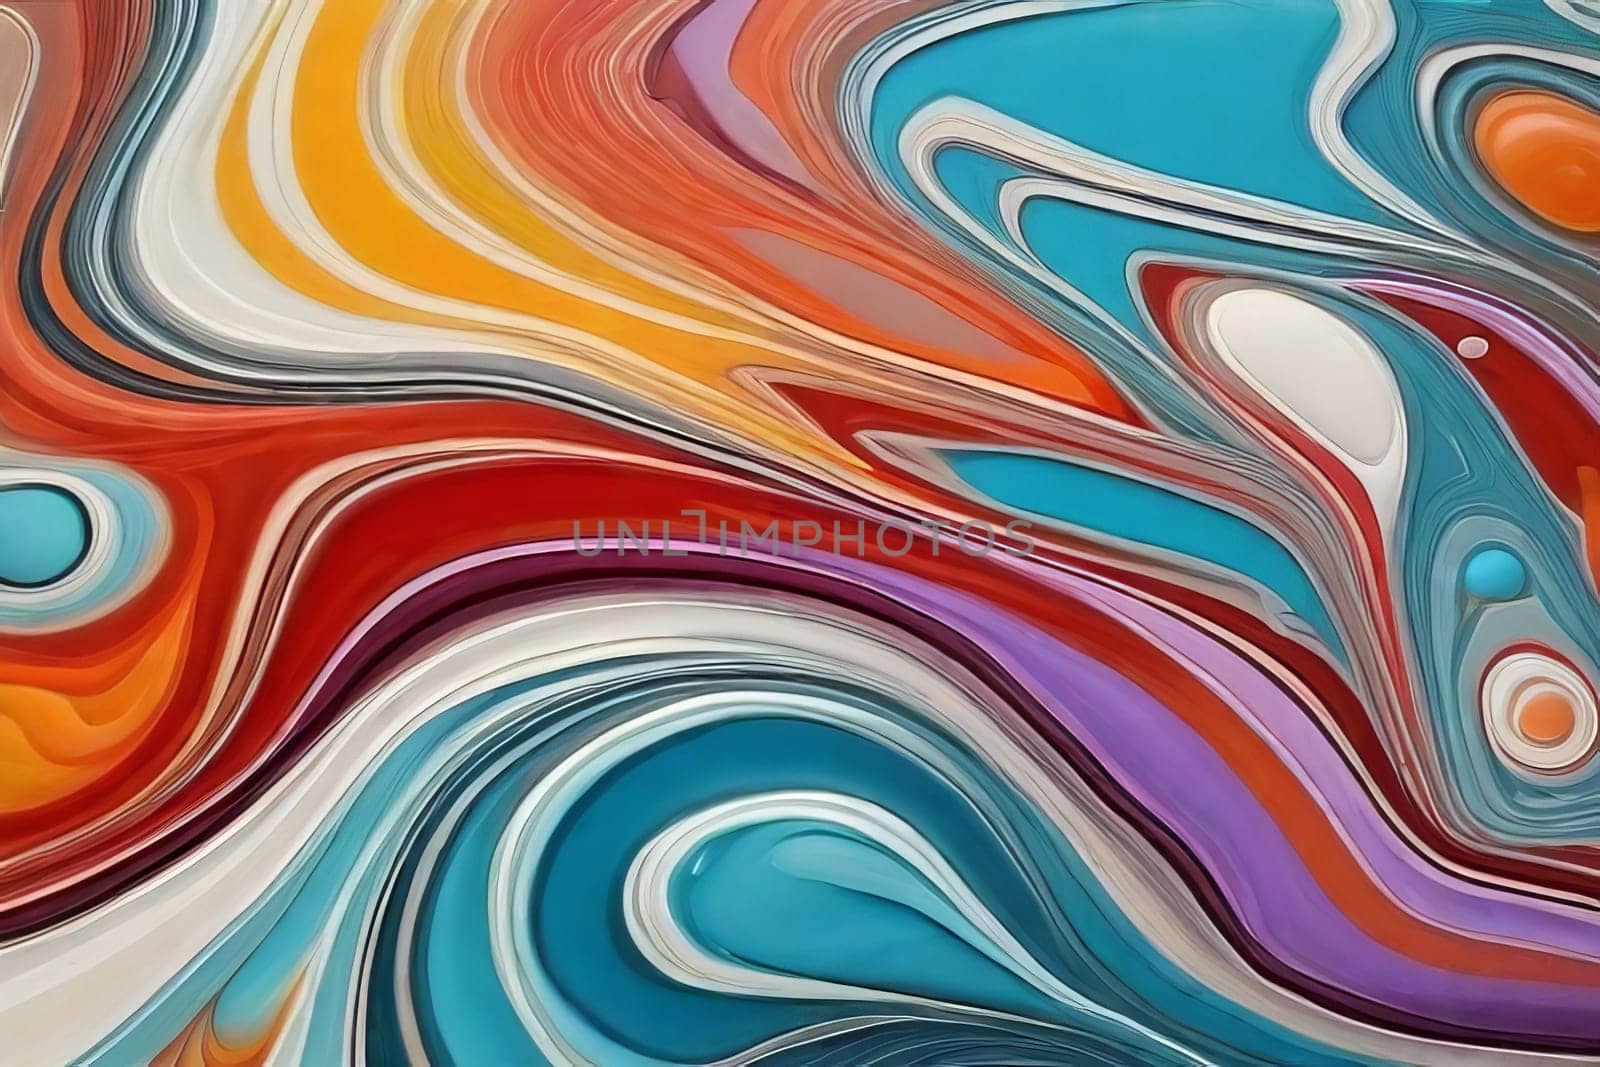 Exquisite Acrylic Flow Artwork: Mesmerizing Abstract Banner Design by Annu1tochka